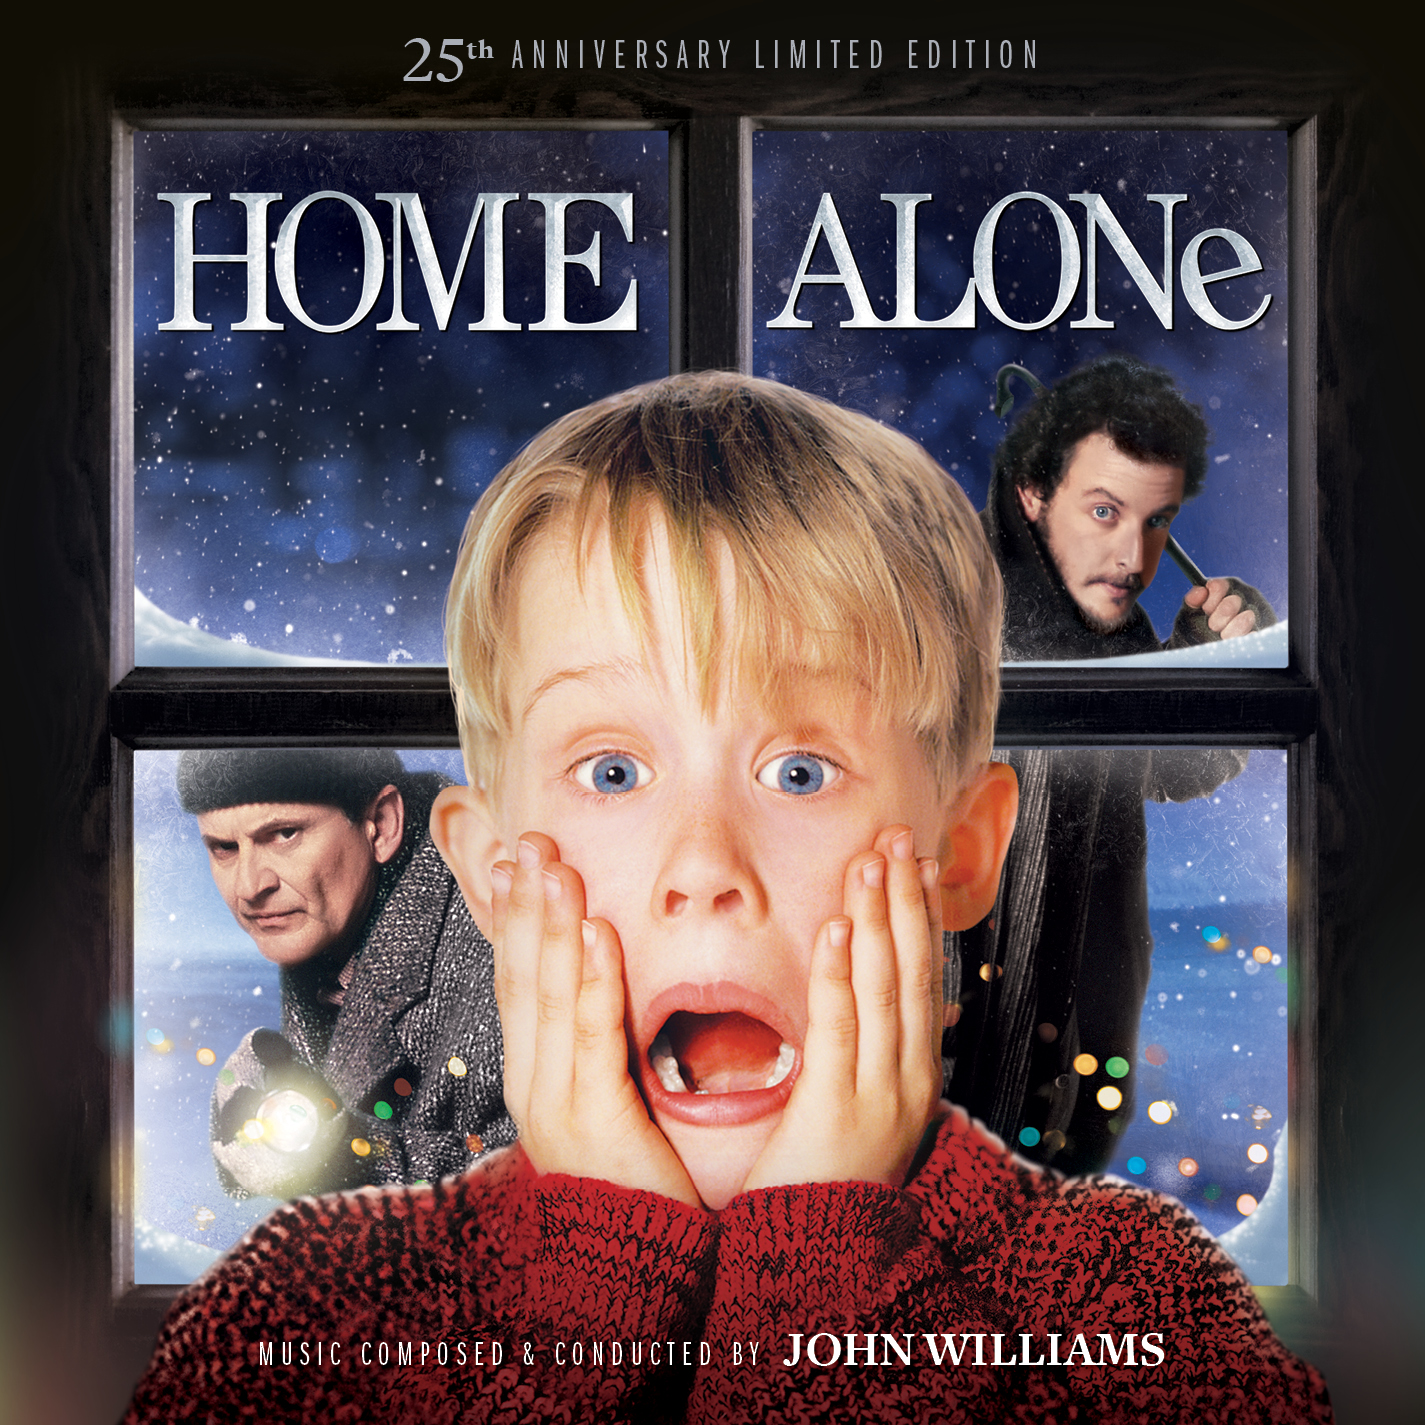 HQ Home Alone Wallpapers | File 1472.08Kb